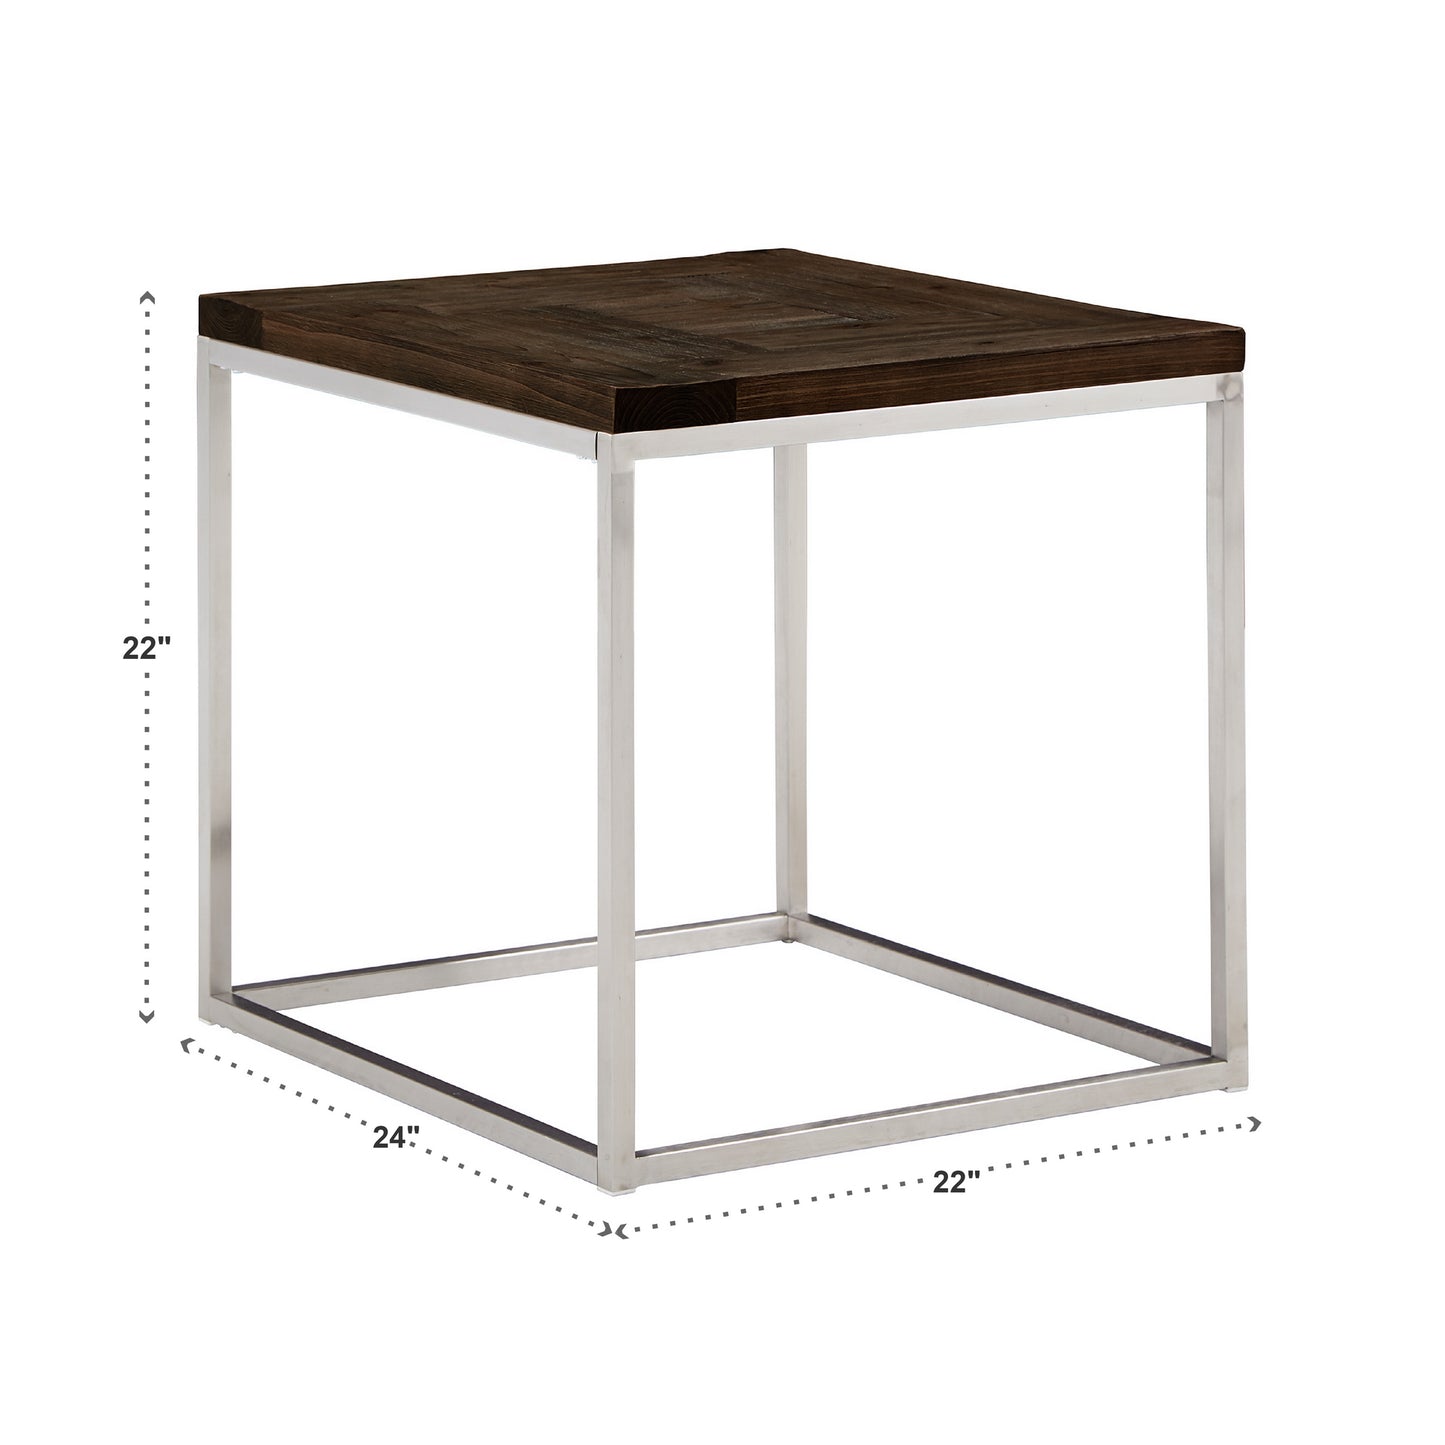 Stainless Steel Rectangular End Table - Brown Finish Top